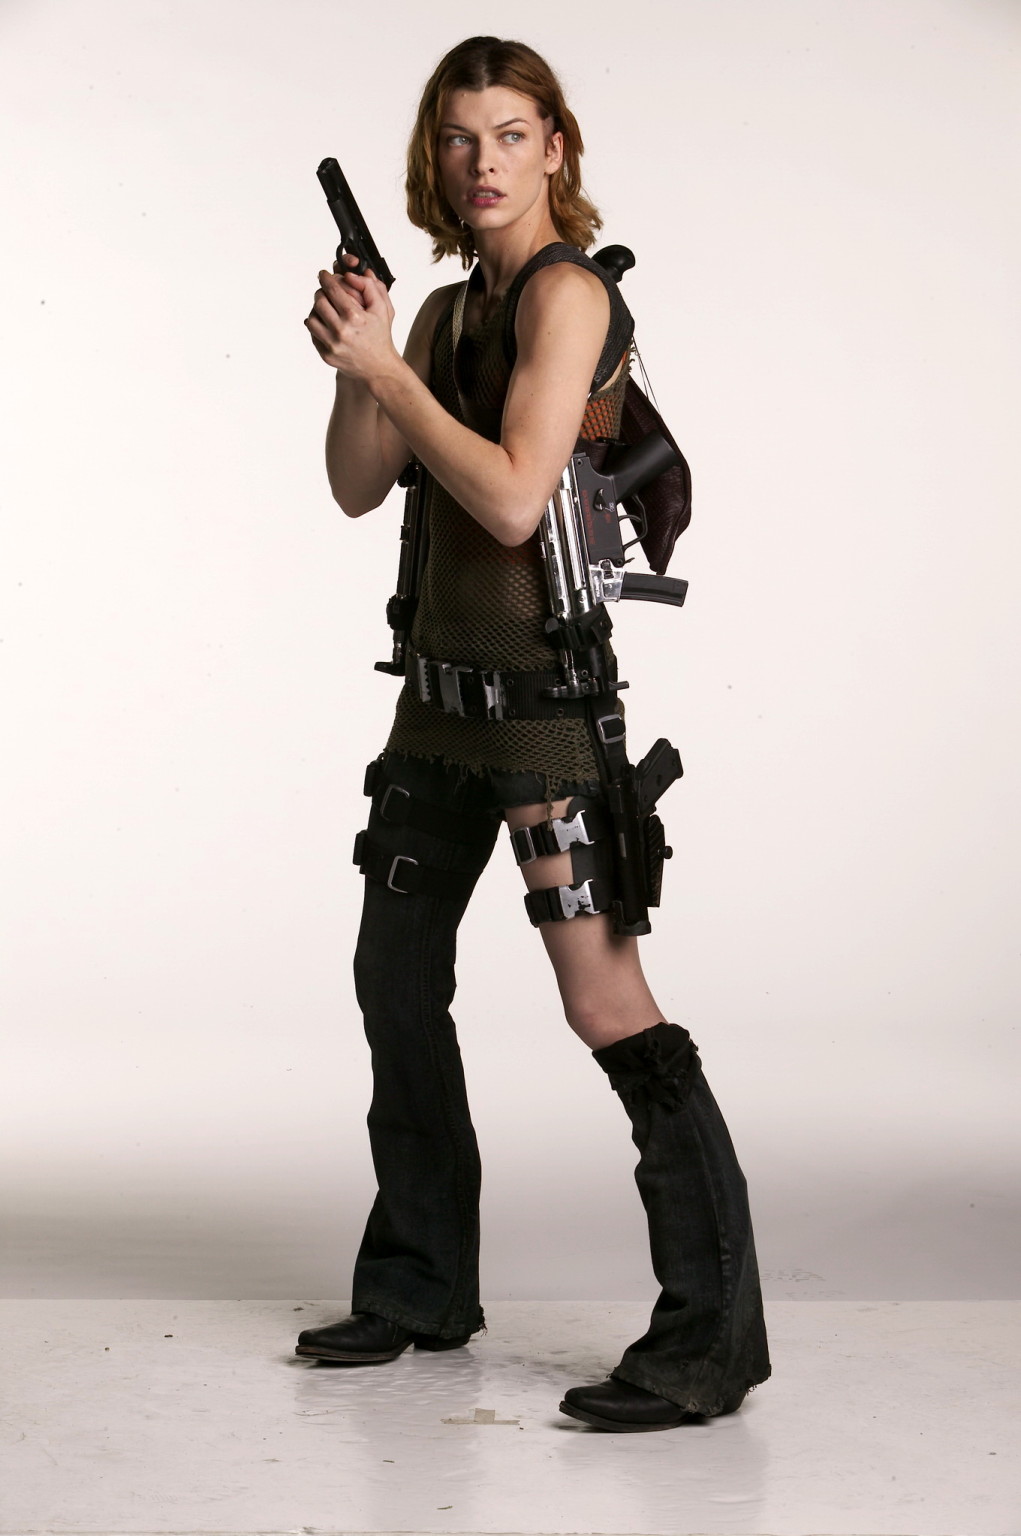 Milla Jovovich looking hot  armed to the teeth in the 'Resident Evil: Apocalypse #75233265